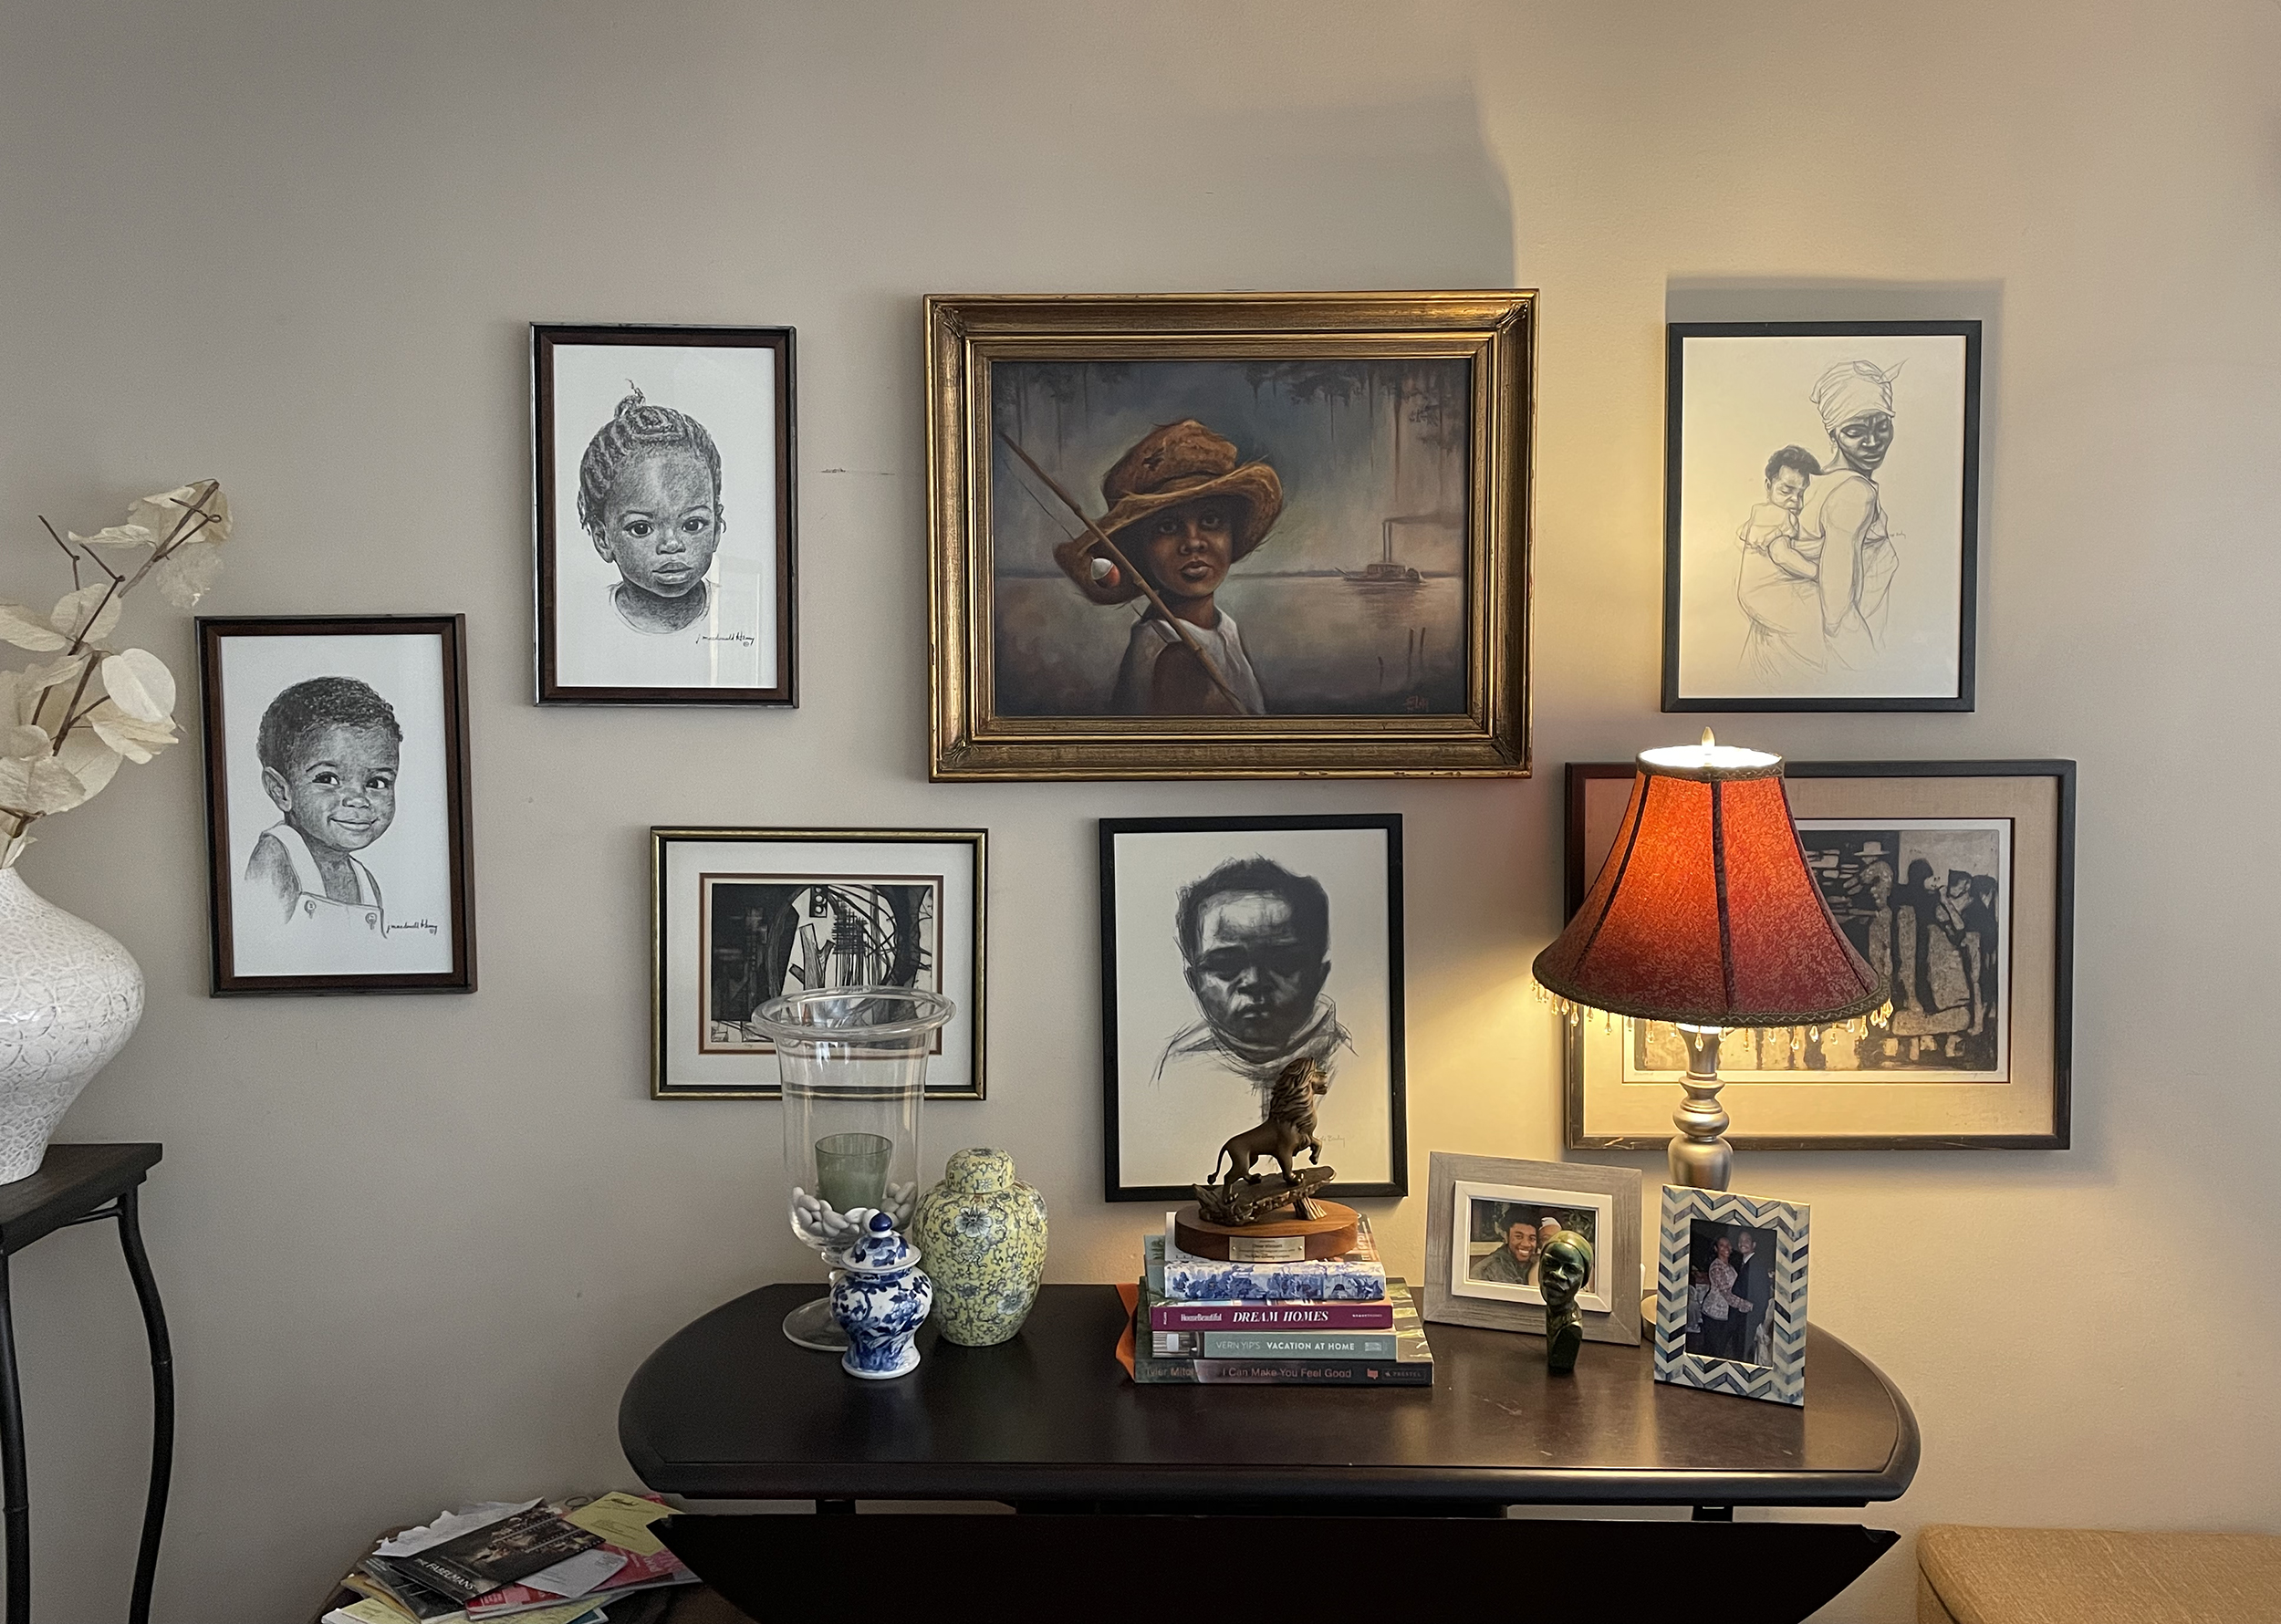 A collage of paintings and drawings of Black people, mostly children, hanging on the wall.